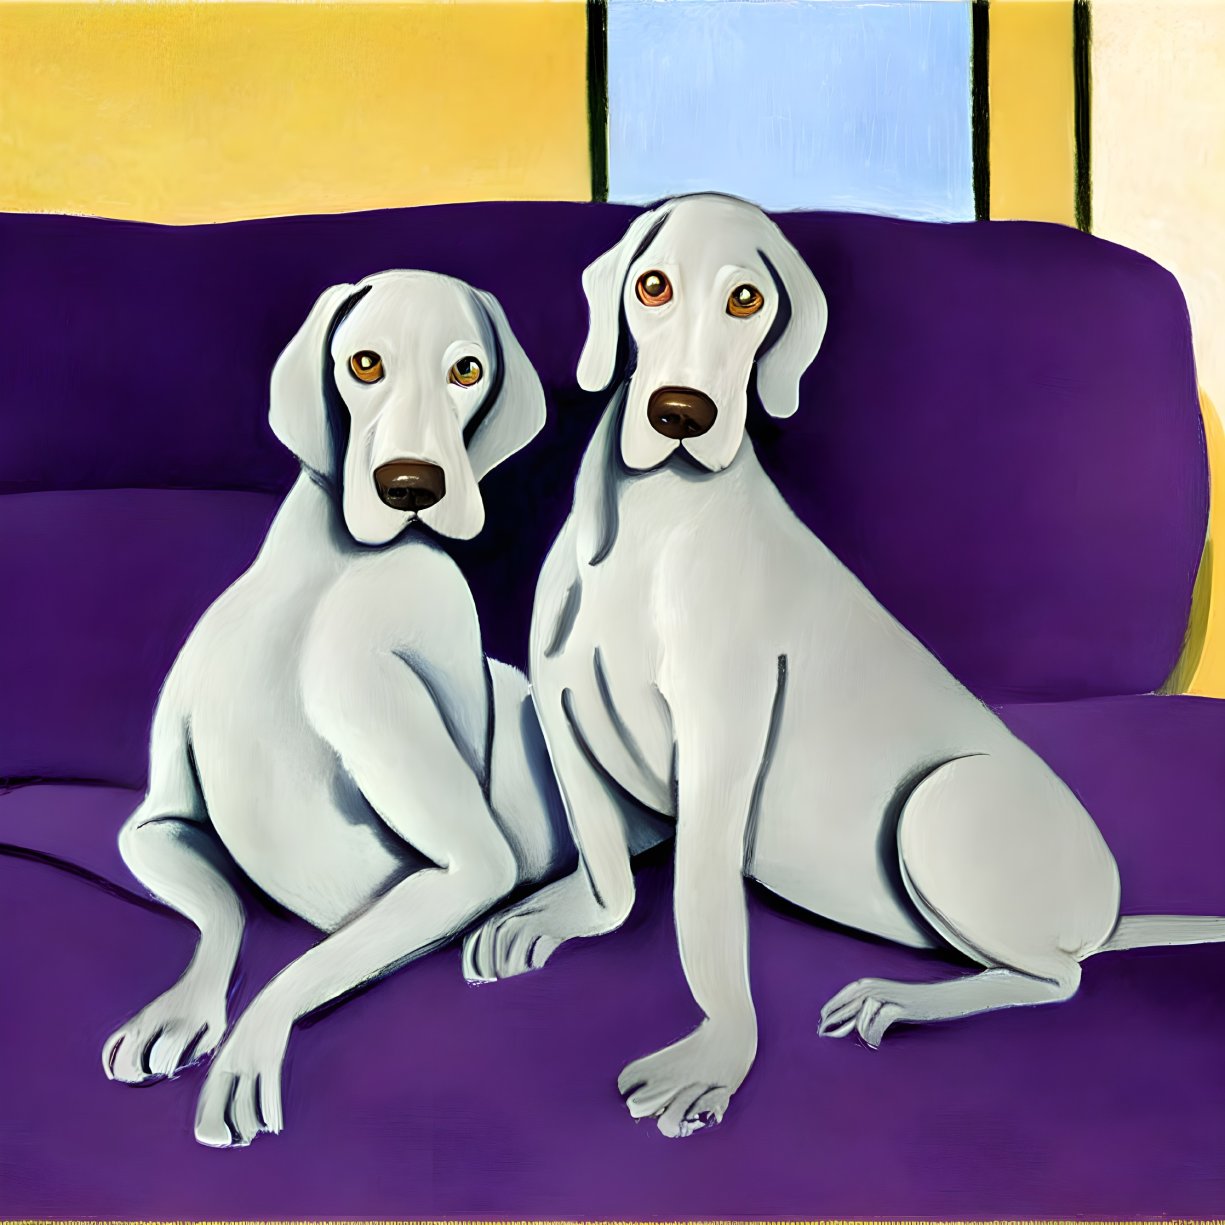 Stylized white dogs on purple sofa against colorful background